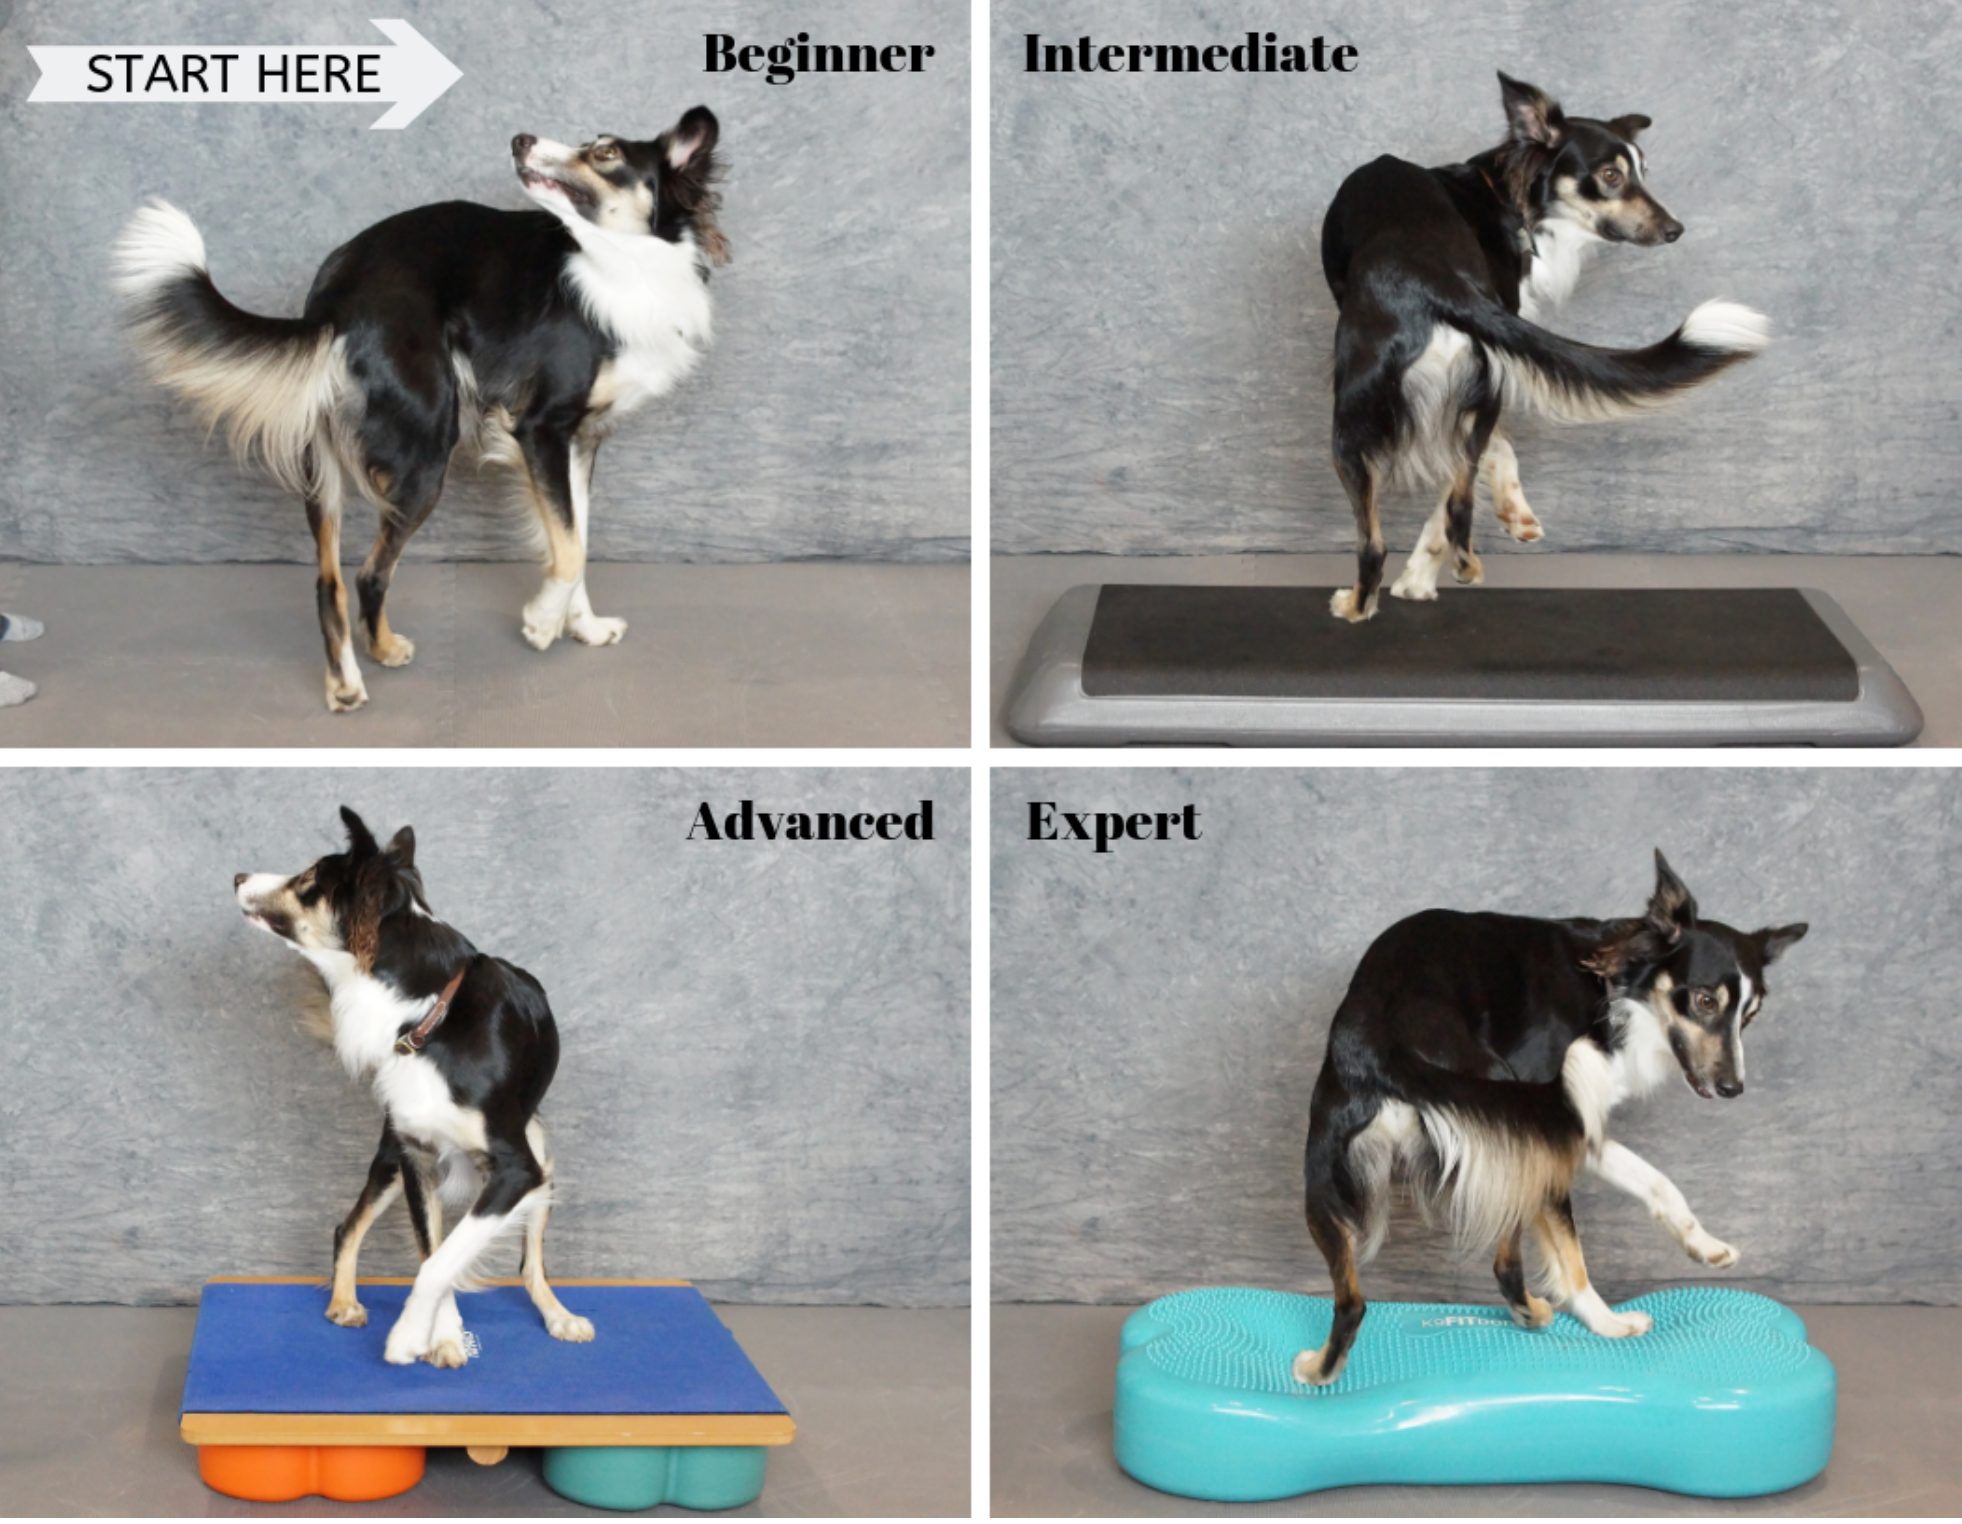 Choose Exercises That Match Your Dog's Level of Fitness